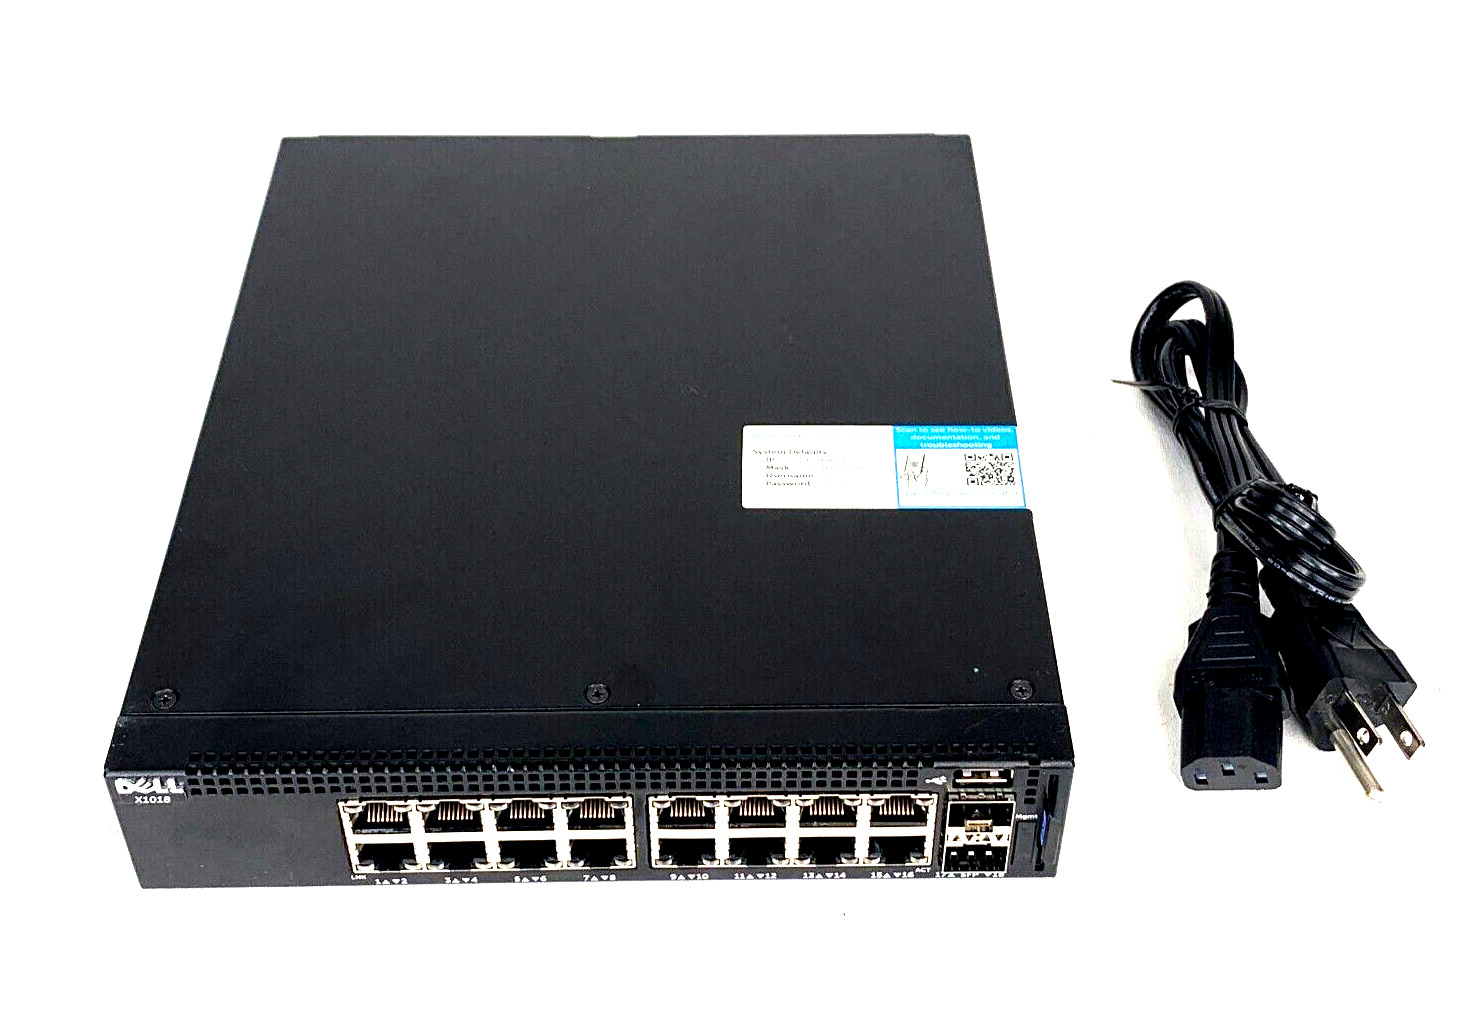 Dell X1018 X-Series Smart Managed Switches 16-Port Gigabit 2-Port SFP Switch